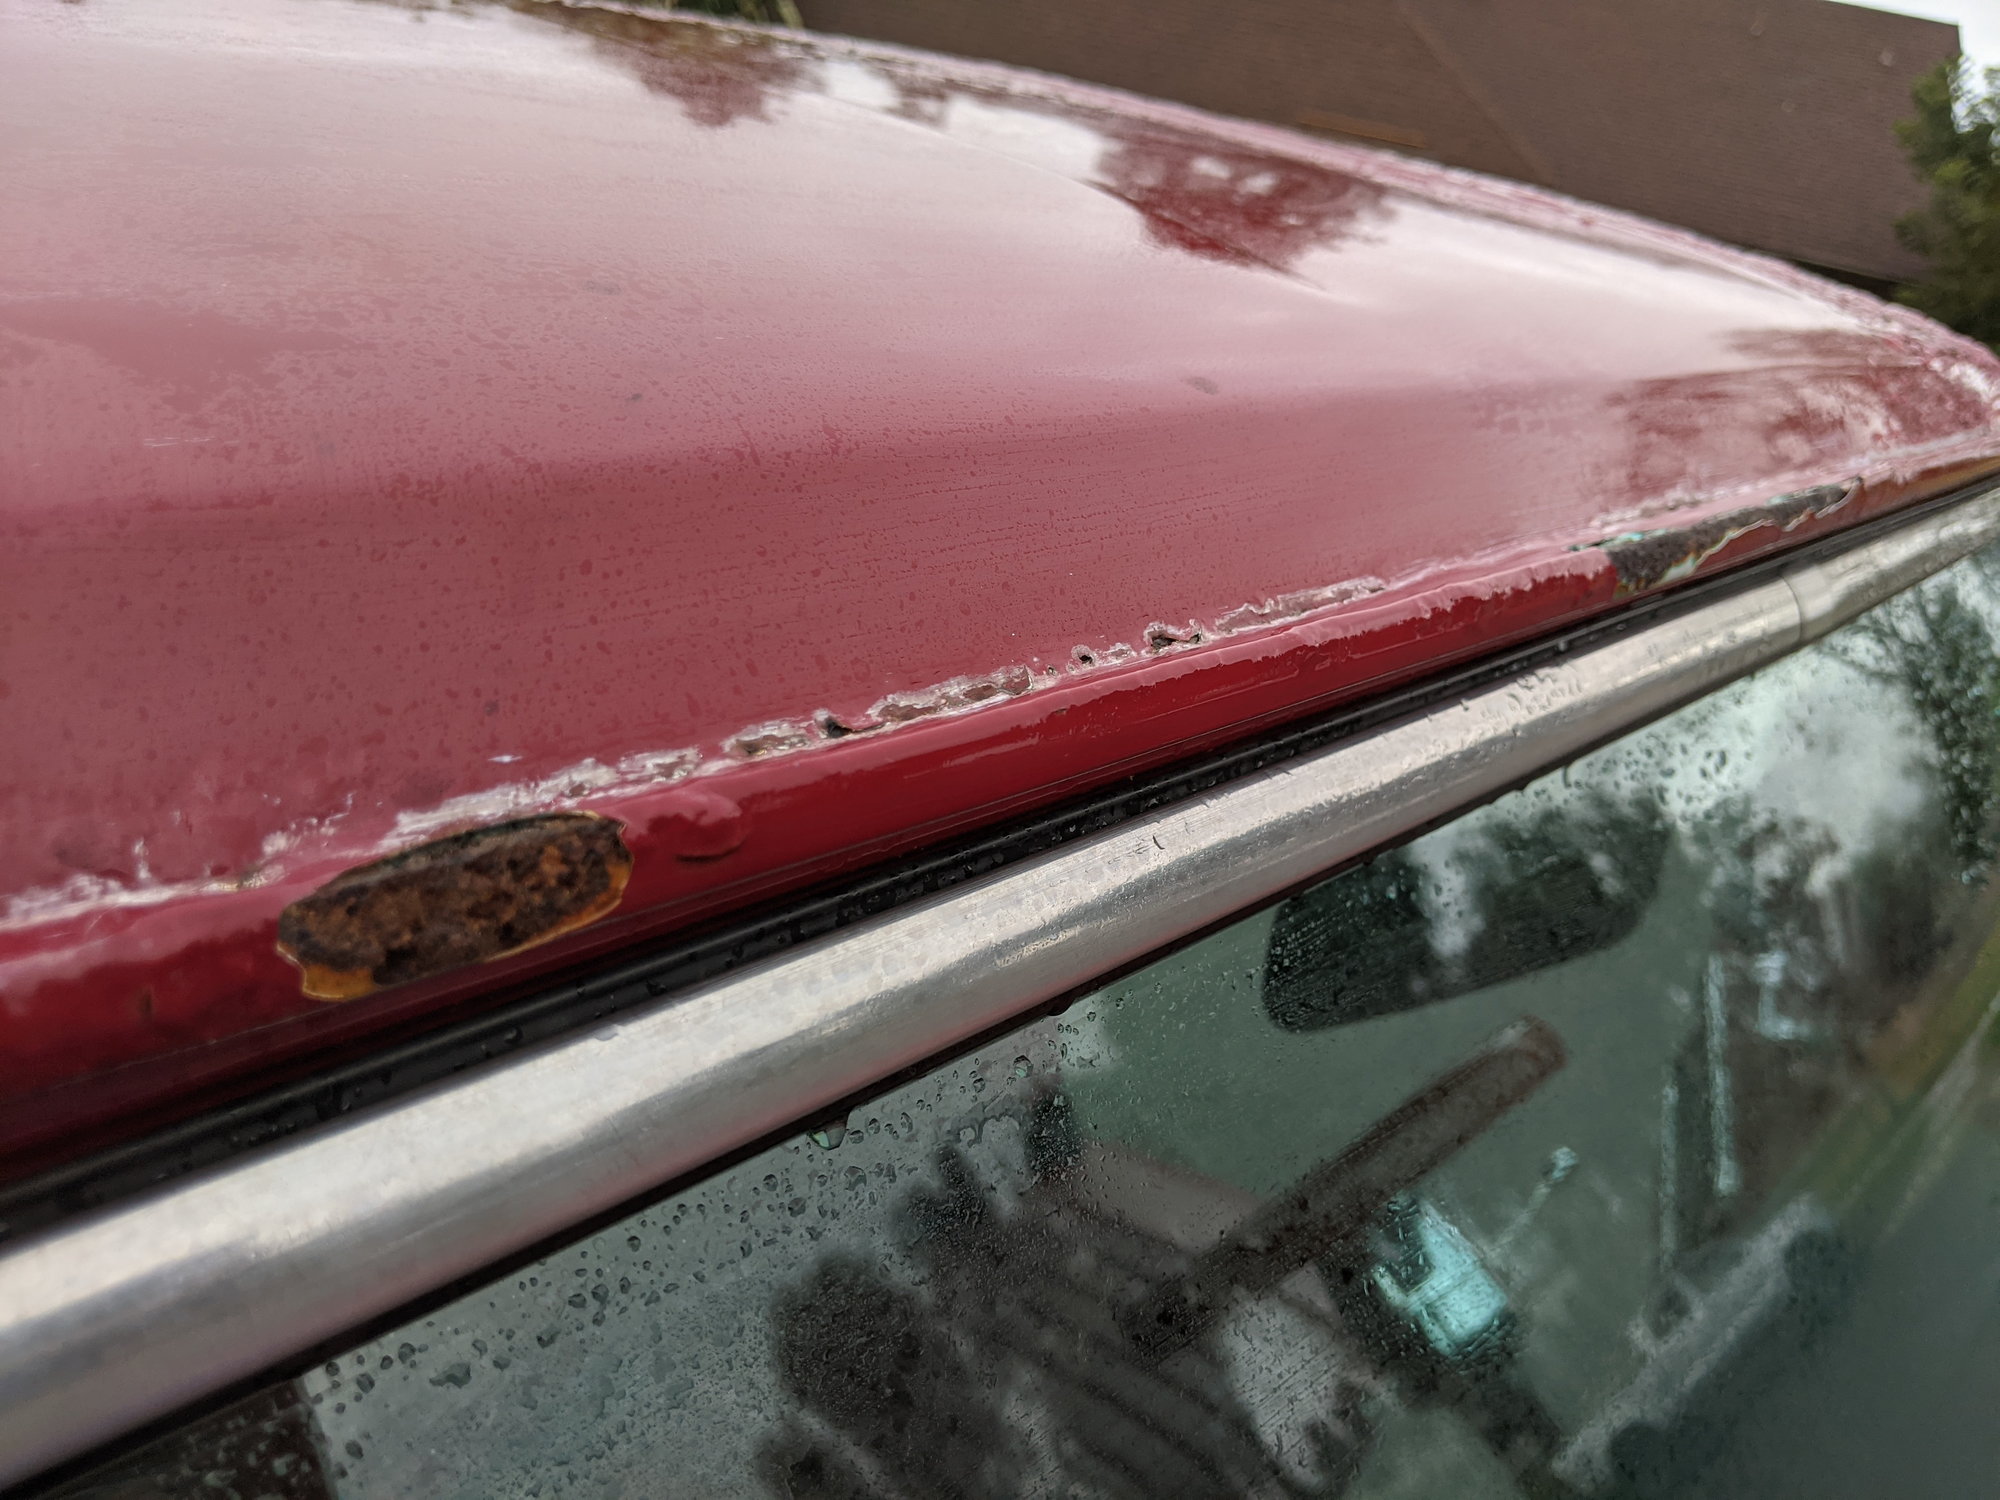 How bad is my rust? - Ford Truck Enthusiasts Forums